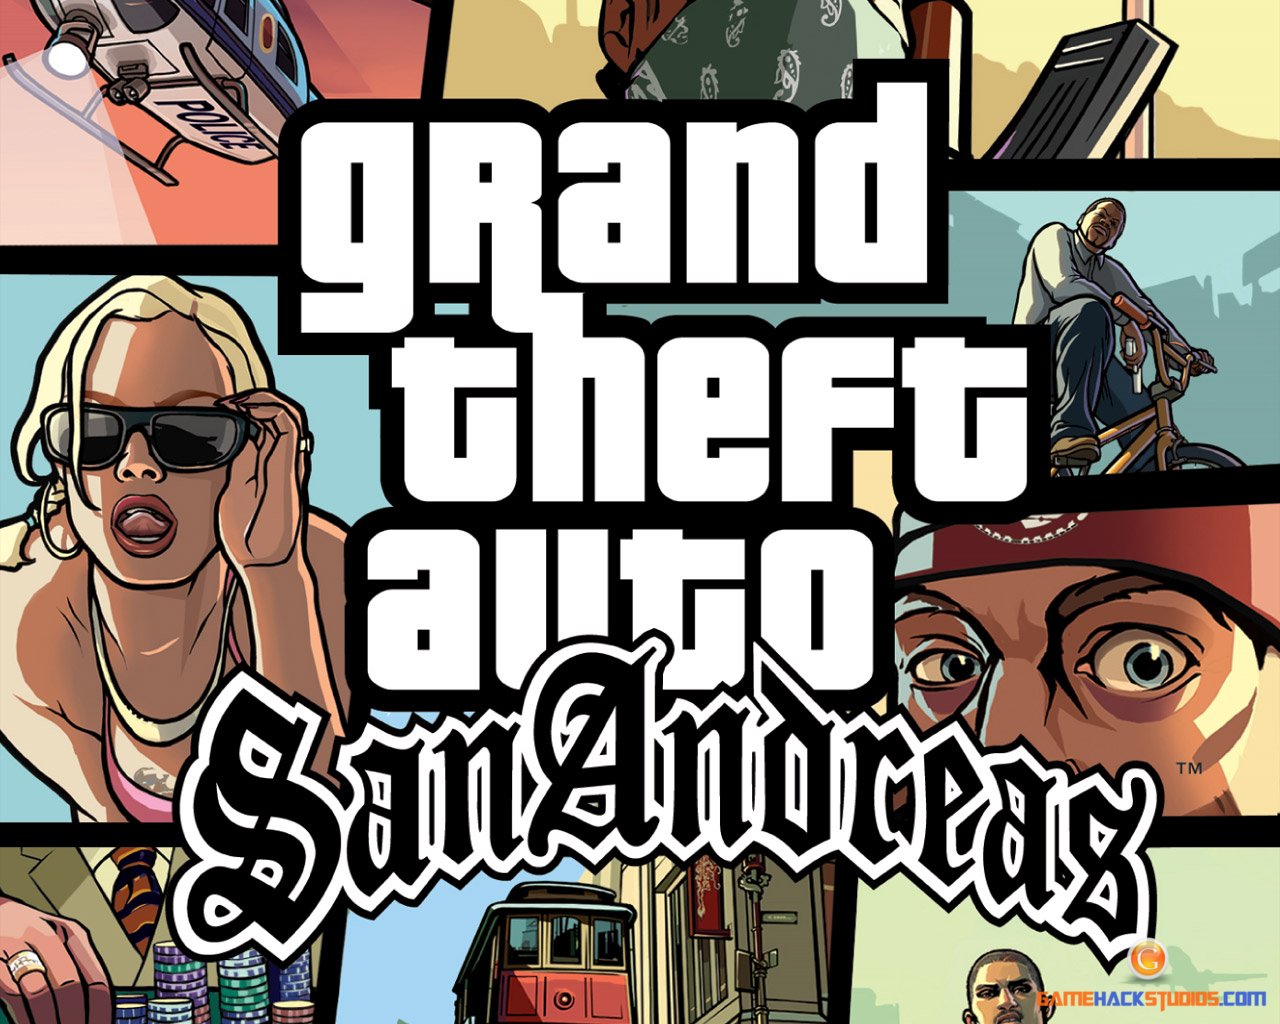 gta san andreas extreme edition free download pc game